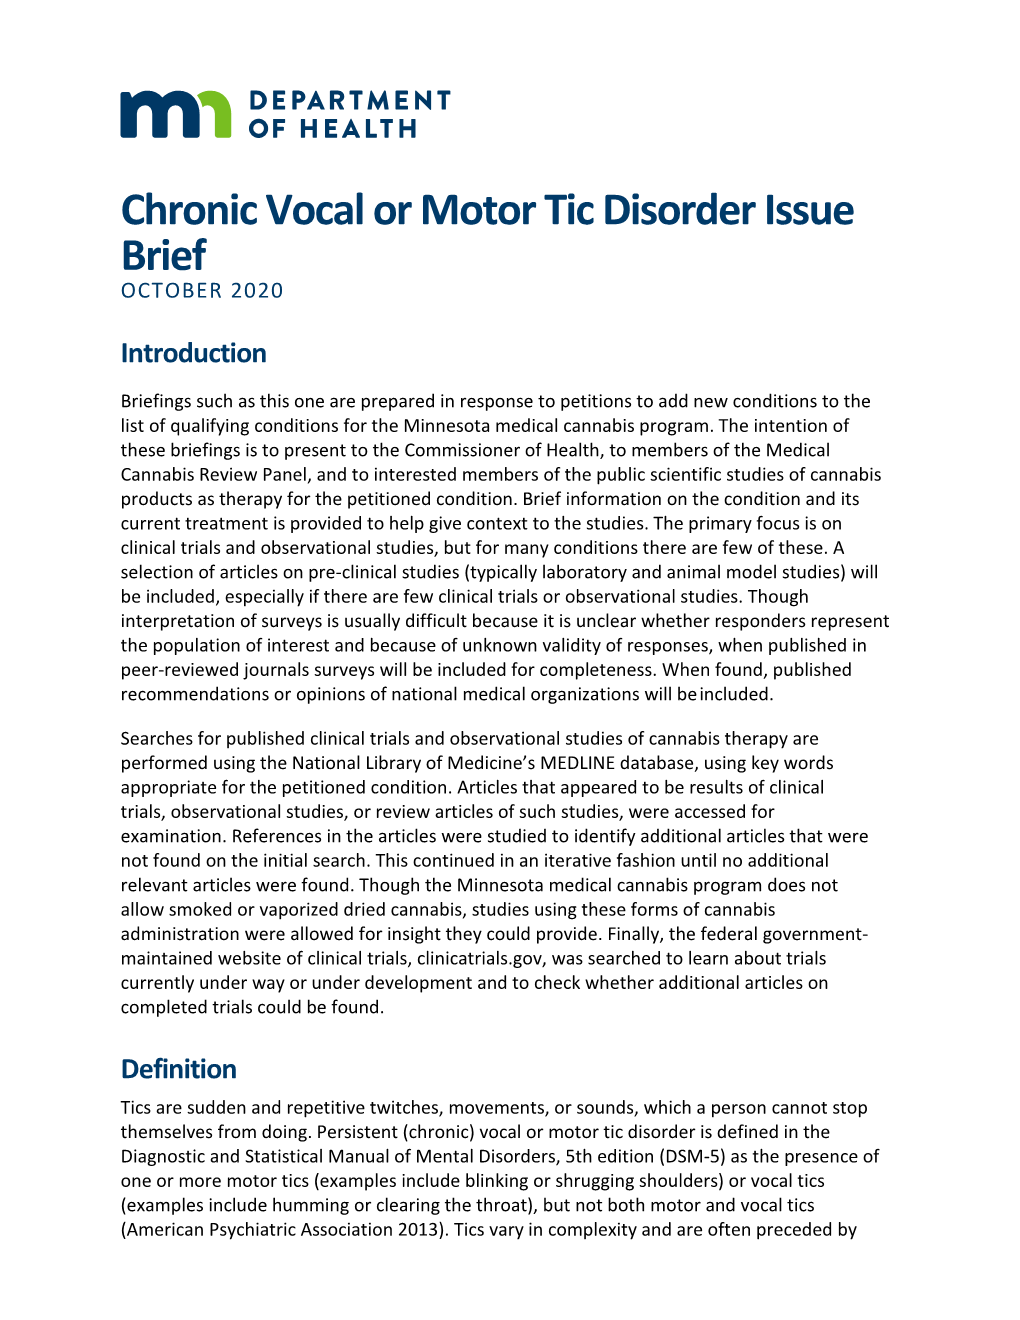 Chronic Vocal Or Motor Tic Disorder Brief